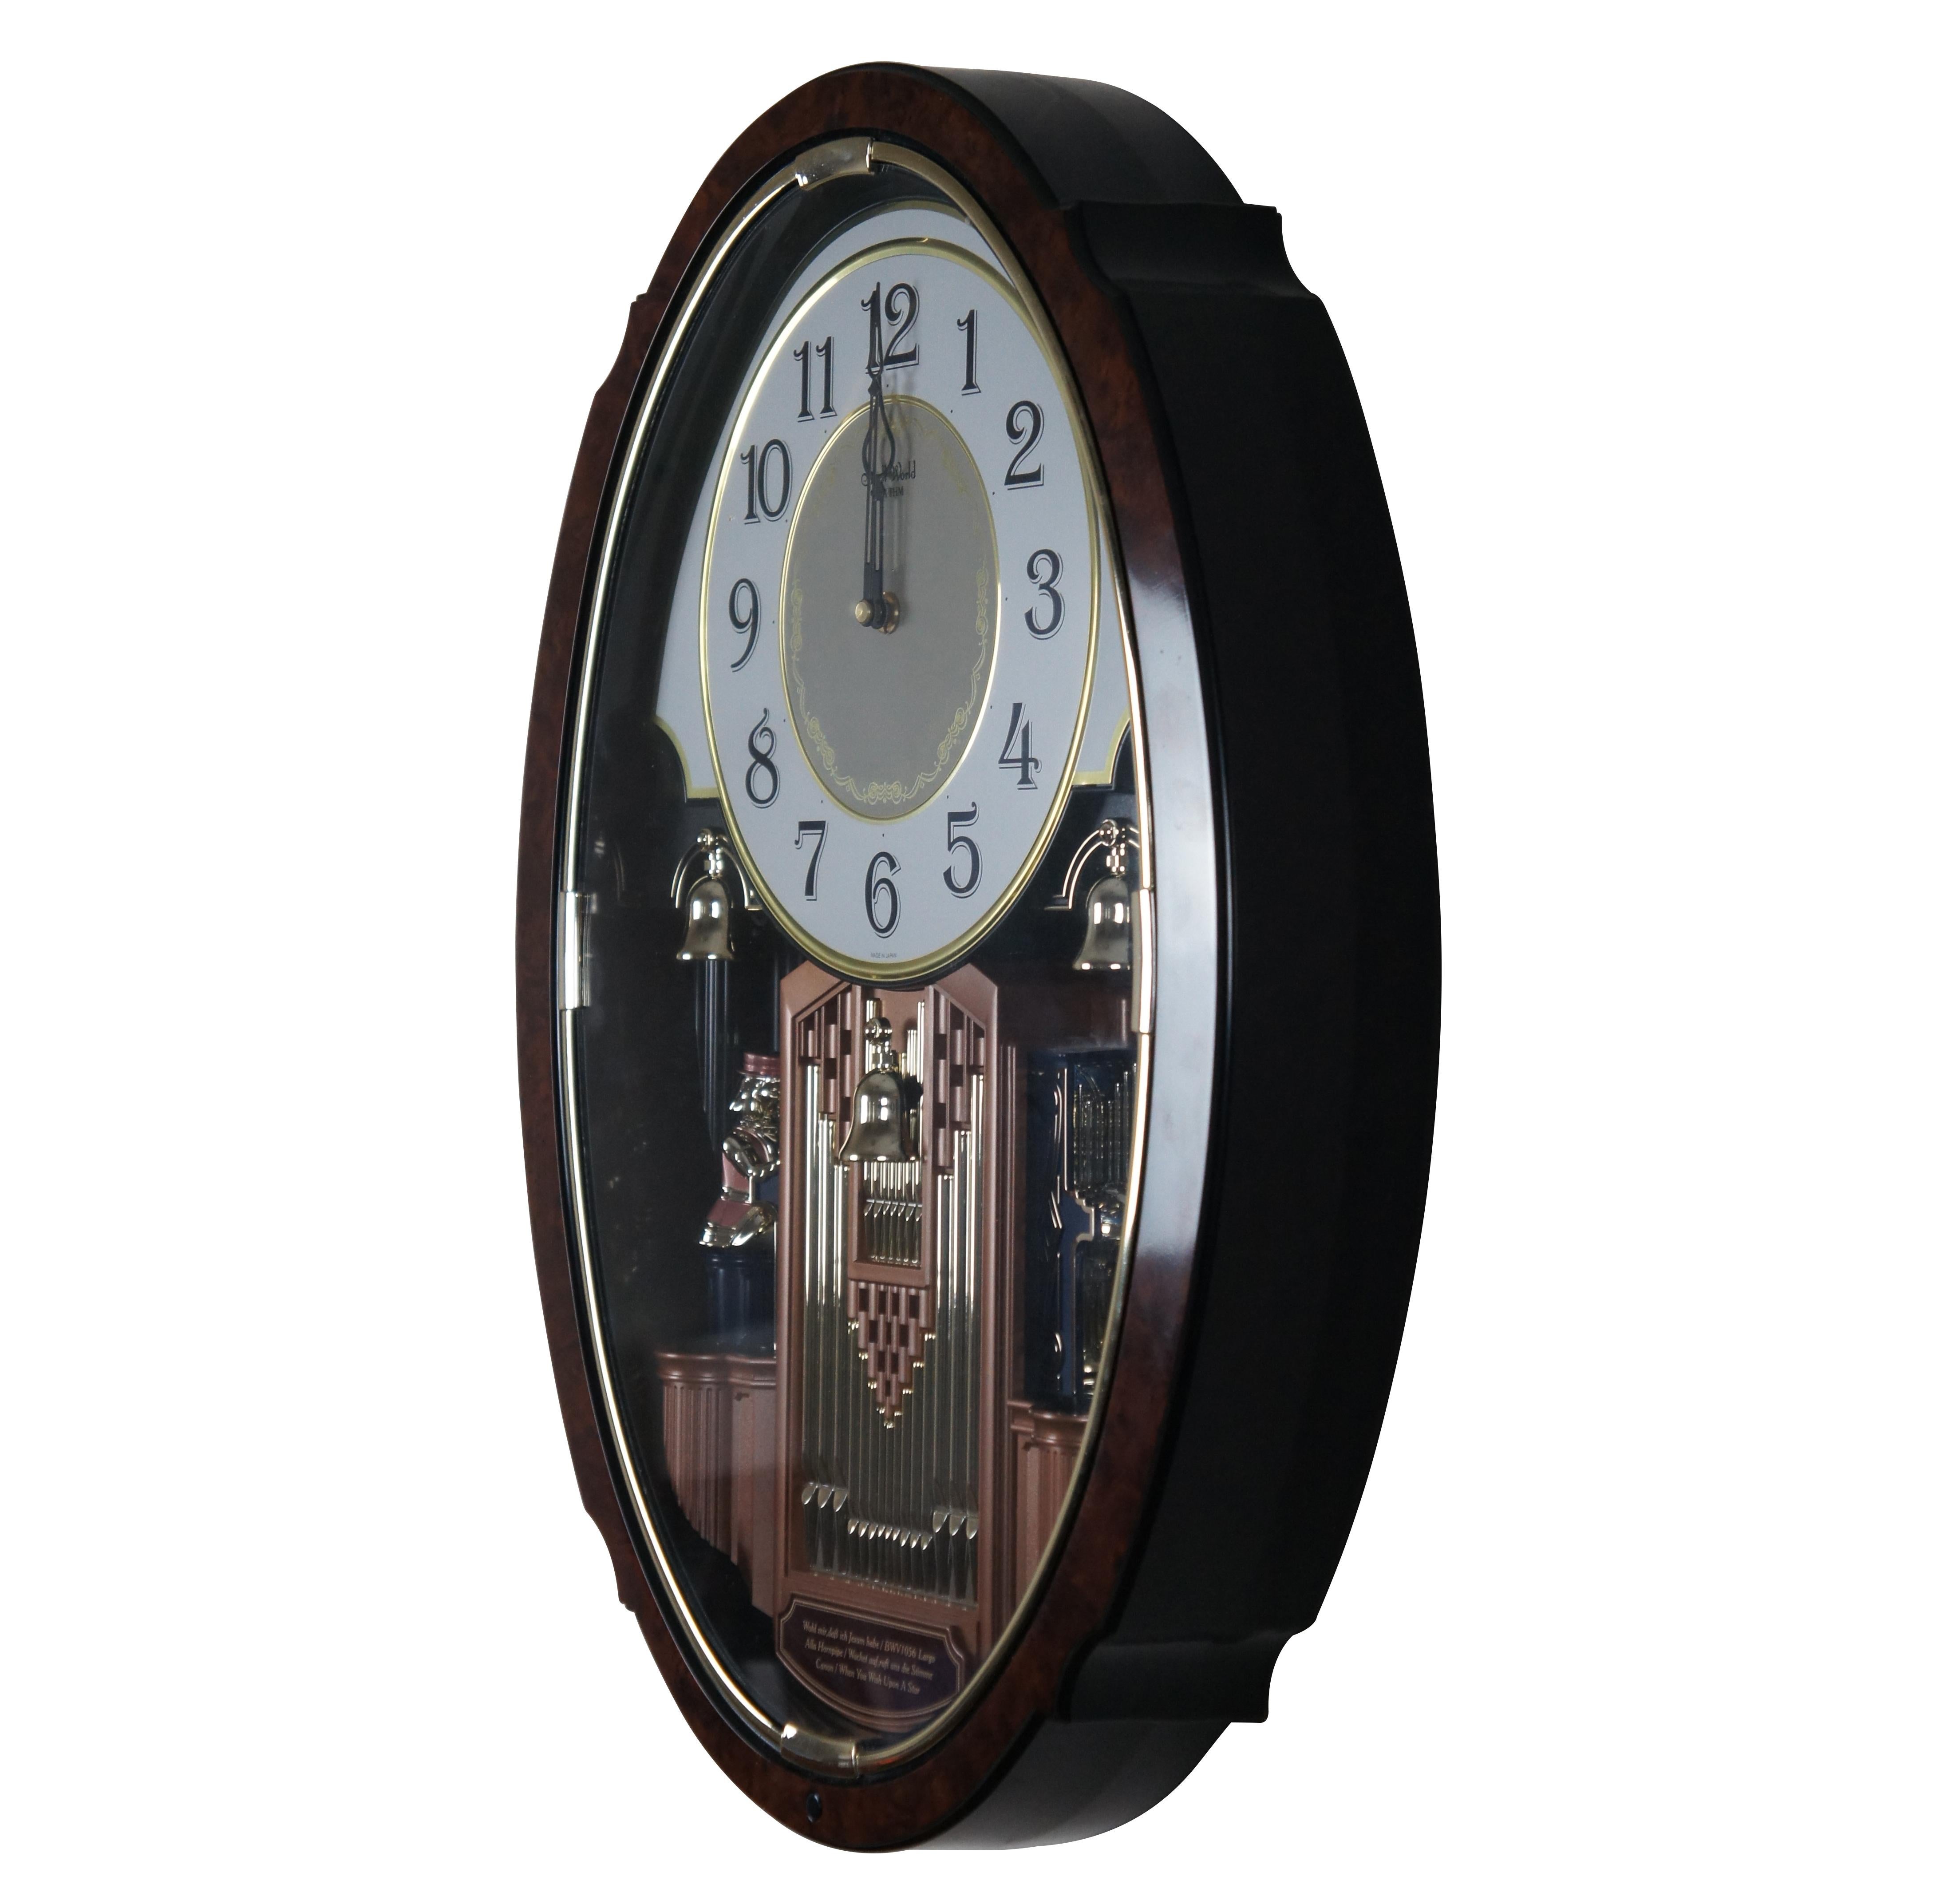 Late 20th century Rhythm Small World, battery operated, musical animated wall clock. Made in Japan. Features an oval plastic case finished with a burl wood veneer, with a white and gold face over a gold, copper and blue painted pipe organ and bells,